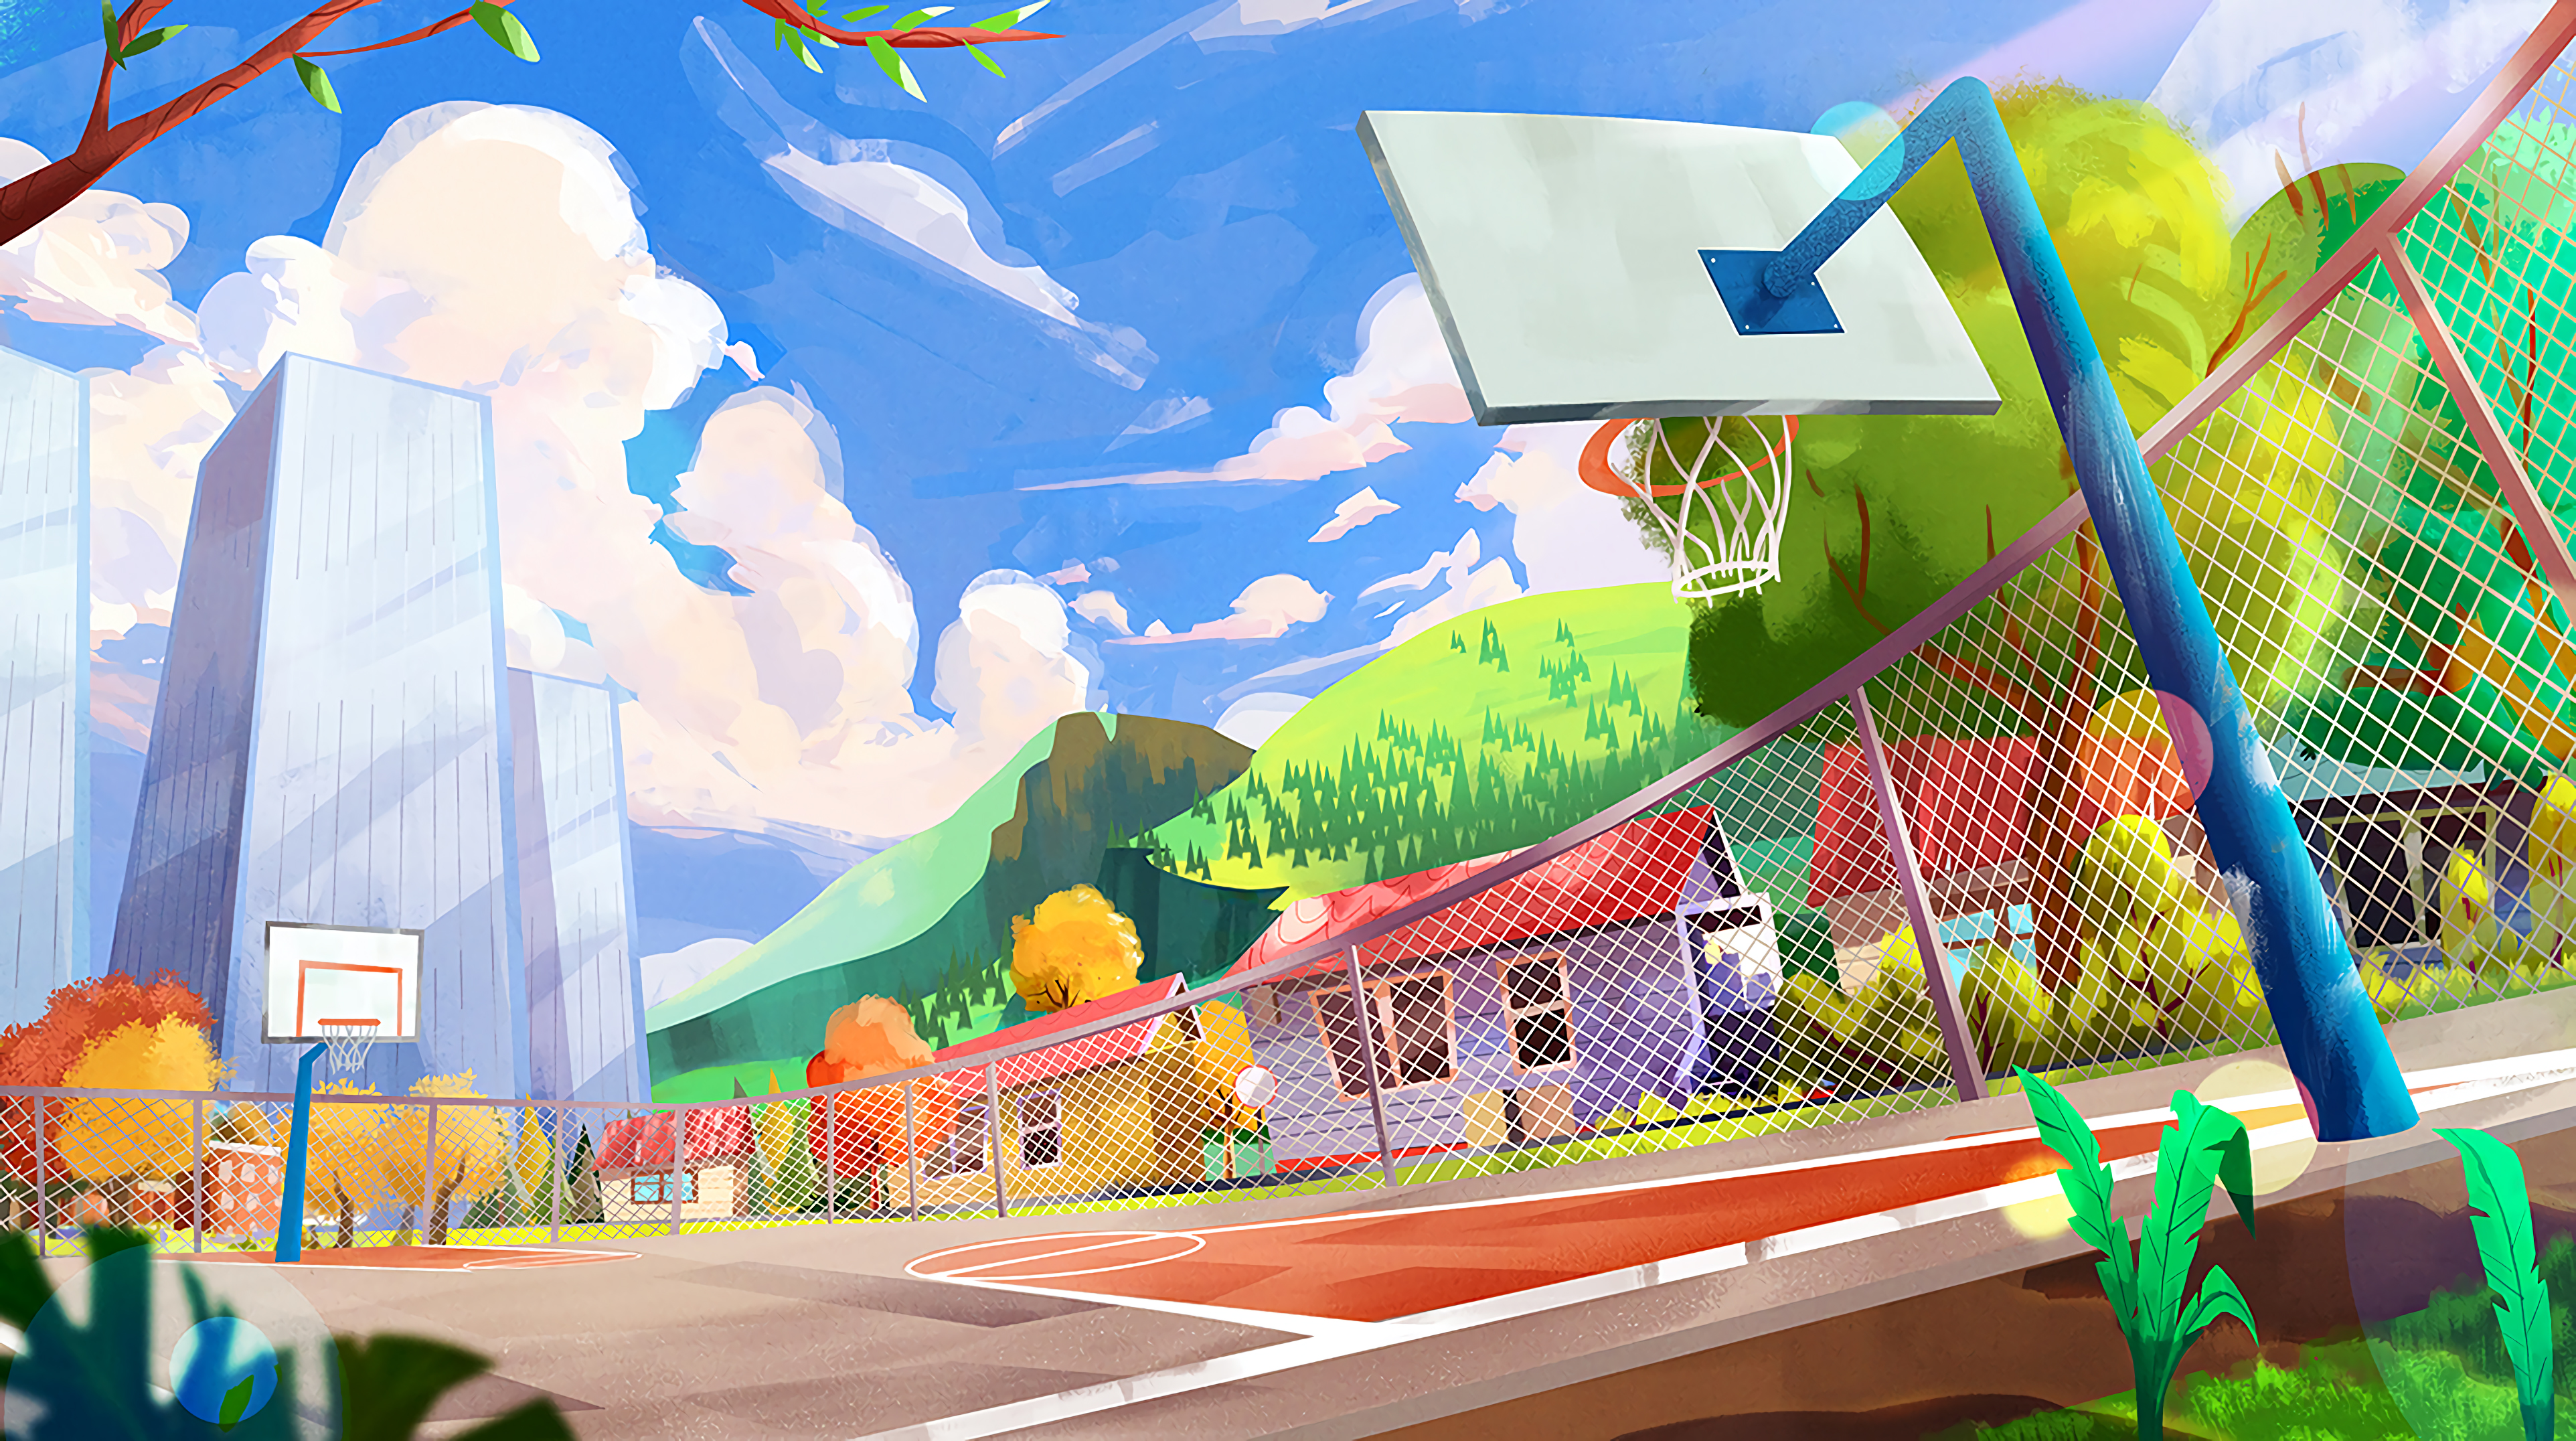 basketball hoop, playground, city, colorful, art, colourful, basketball ring, sports ground